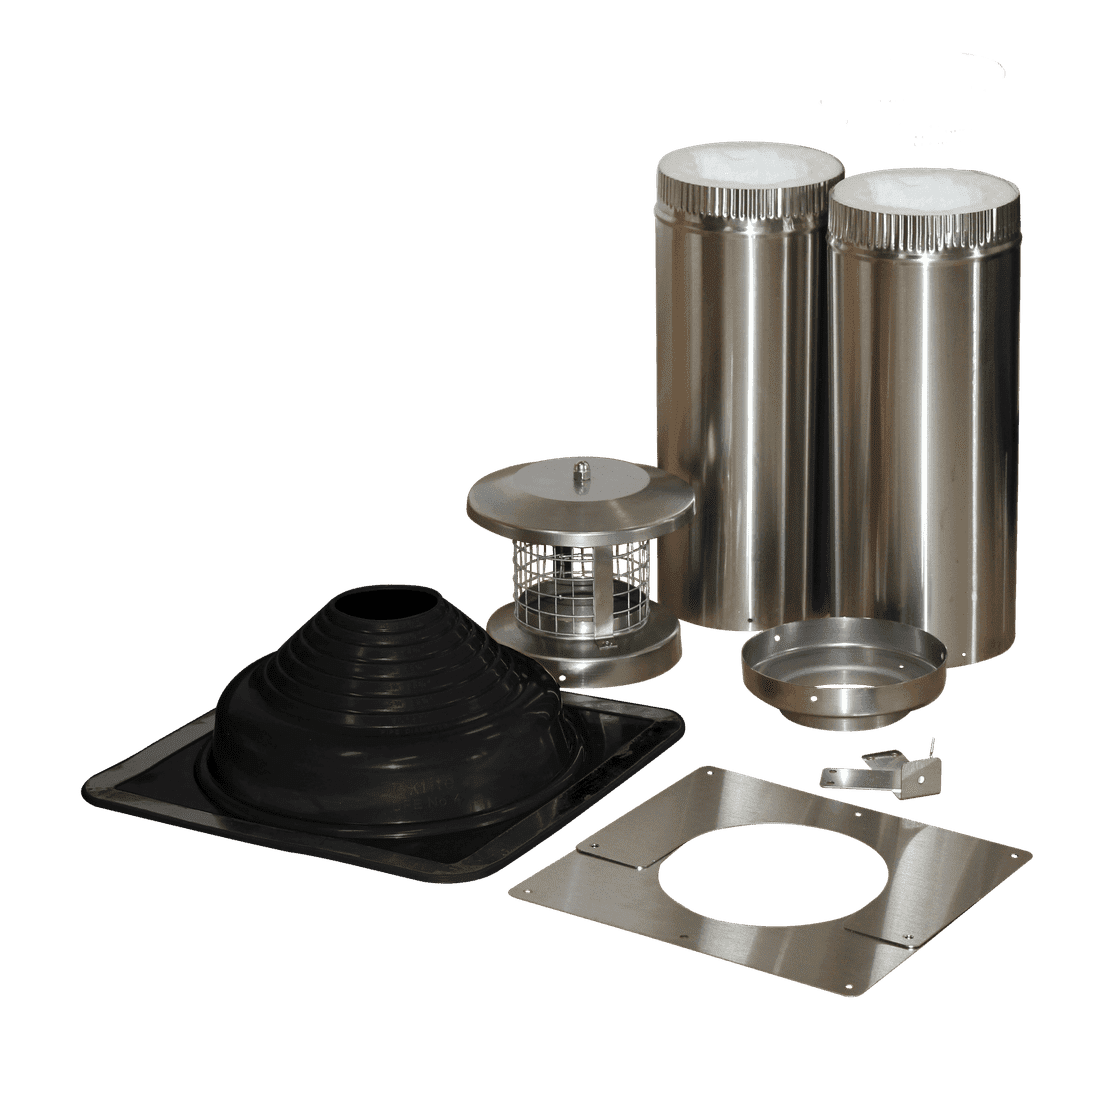 Through The Wall Kit for 6 Chimney Pipe with Chimney Cap